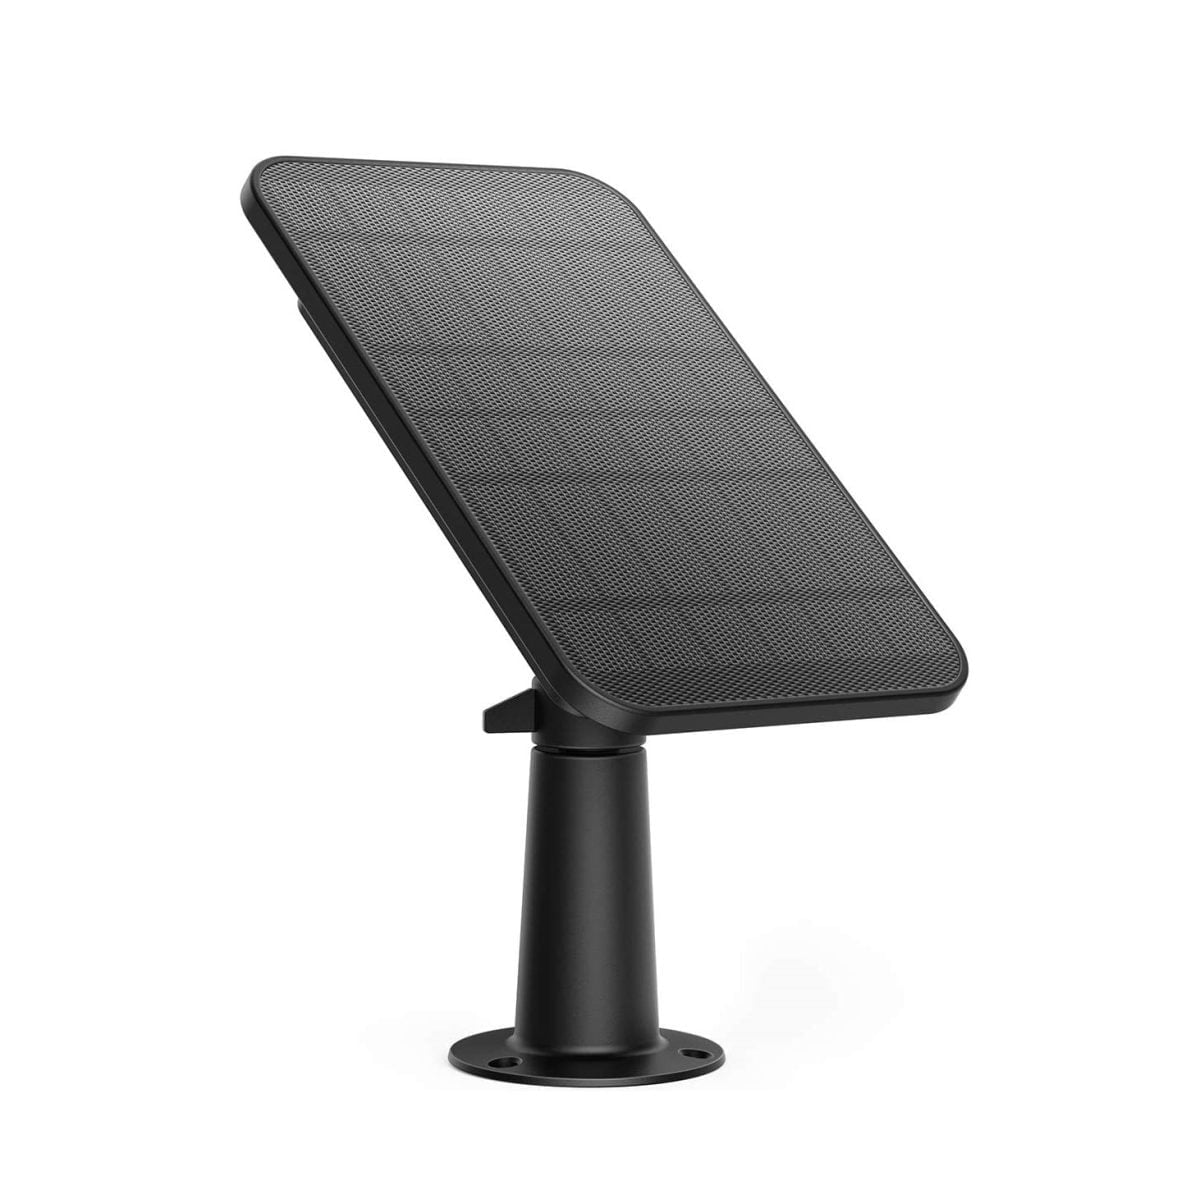 Eufy &Amp;Lt;H1&Amp;Gt;Eufy Solar Panel - Black&Amp;Lt;/H1&Amp;Gt; The Eufy Security Solar Panel Charger Is The Only Official Solar Panel On The Market, Designed To Provide Continuous Charging For All Eufycam Models. Provide Continuous Charging For Eufycam, Eufycam E, Eufycam 2, Eufycam 2 Pro, Eufycam 2C, Eufycam 2C Pro. &Amp;Lt;Ul&Amp;Gt; &Amp;Lt;Li Class=&Amp;Quot;Bold V-Fw-Medium Body-Copy&Amp;Quot;&Amp;Gt;1X Solar Panel&Amp;Lt;/Li&Amp;Gt; &Amp;Lt;Li Class=&Amp;Quot;Bold V-Fw-Medium Body-Copy&Amp;Quot;&Amp;Gt;1X 13Ft (4M) Long Charging Cable&Amp;Lt;/Li&Amp;Gt; &Amp;Lt;Li Class=&Amp;Quot;Bold V-Fw-Medium Body-Copy&Amp;Quot;&Amp;Gt;1X 360-Degree Mounting Bracket&Amp;Lt;/Li&Amp;Gt; &Amp;Lt;Li Class=&Amp;Quot;Bold V-Fw-Medium Body-Copy&Amp;Quot;&Amp;Gt;1X Set Of Installation Screws &Amp;Amp; Wall Anchors&Amp;Lt;/Li&Amp;Gt; &Amp;Lt;Li Class=&Amp;Quot;Bold V-Fw-Medium Body-Copy&Amp;Quot;&Amp;Gt;4X Camera Adapters&Amp;Lt;/Li&Amp;Gt; &Amp;Lt;Li Class=&Amp;Quot;Bold V-Fw-Medium Body-Copy&Amp;Quot;&Amp;Gt;1X Quick Start Guide&Amp;Lt;/Li&Amp;Gt; &Amp;Lt;/Ul&Amp;Gt; Eufy Solar Panel Eufy Solar Panel - Black T8700011